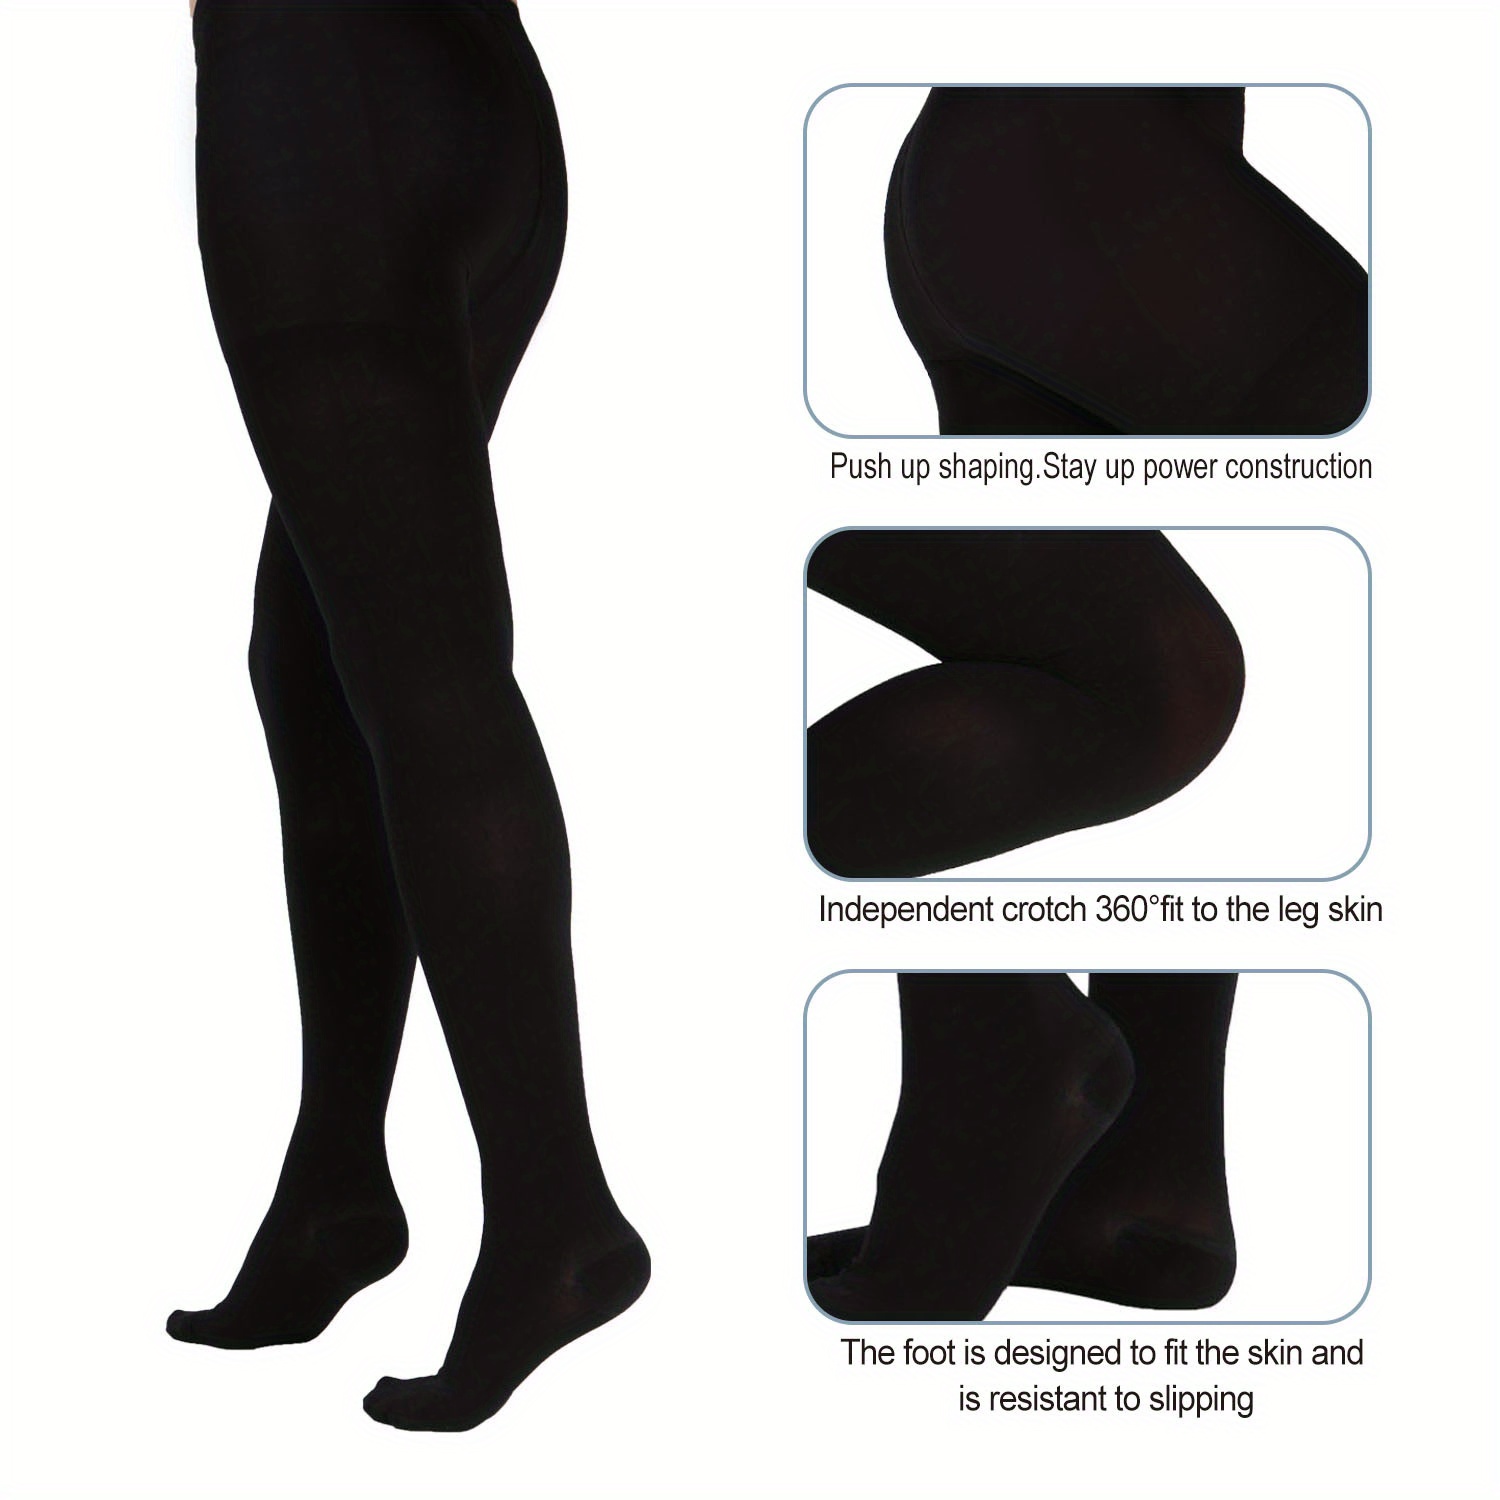  MGANG Medical Compression Pantyhose for Women & Men, 20-30mmHg  Graduated Compression Support Tights, Open Toe, Opaque Waist High  Compression Stockings for Edema, Varicose Veins, Flight, DVT, Black M :  Health 